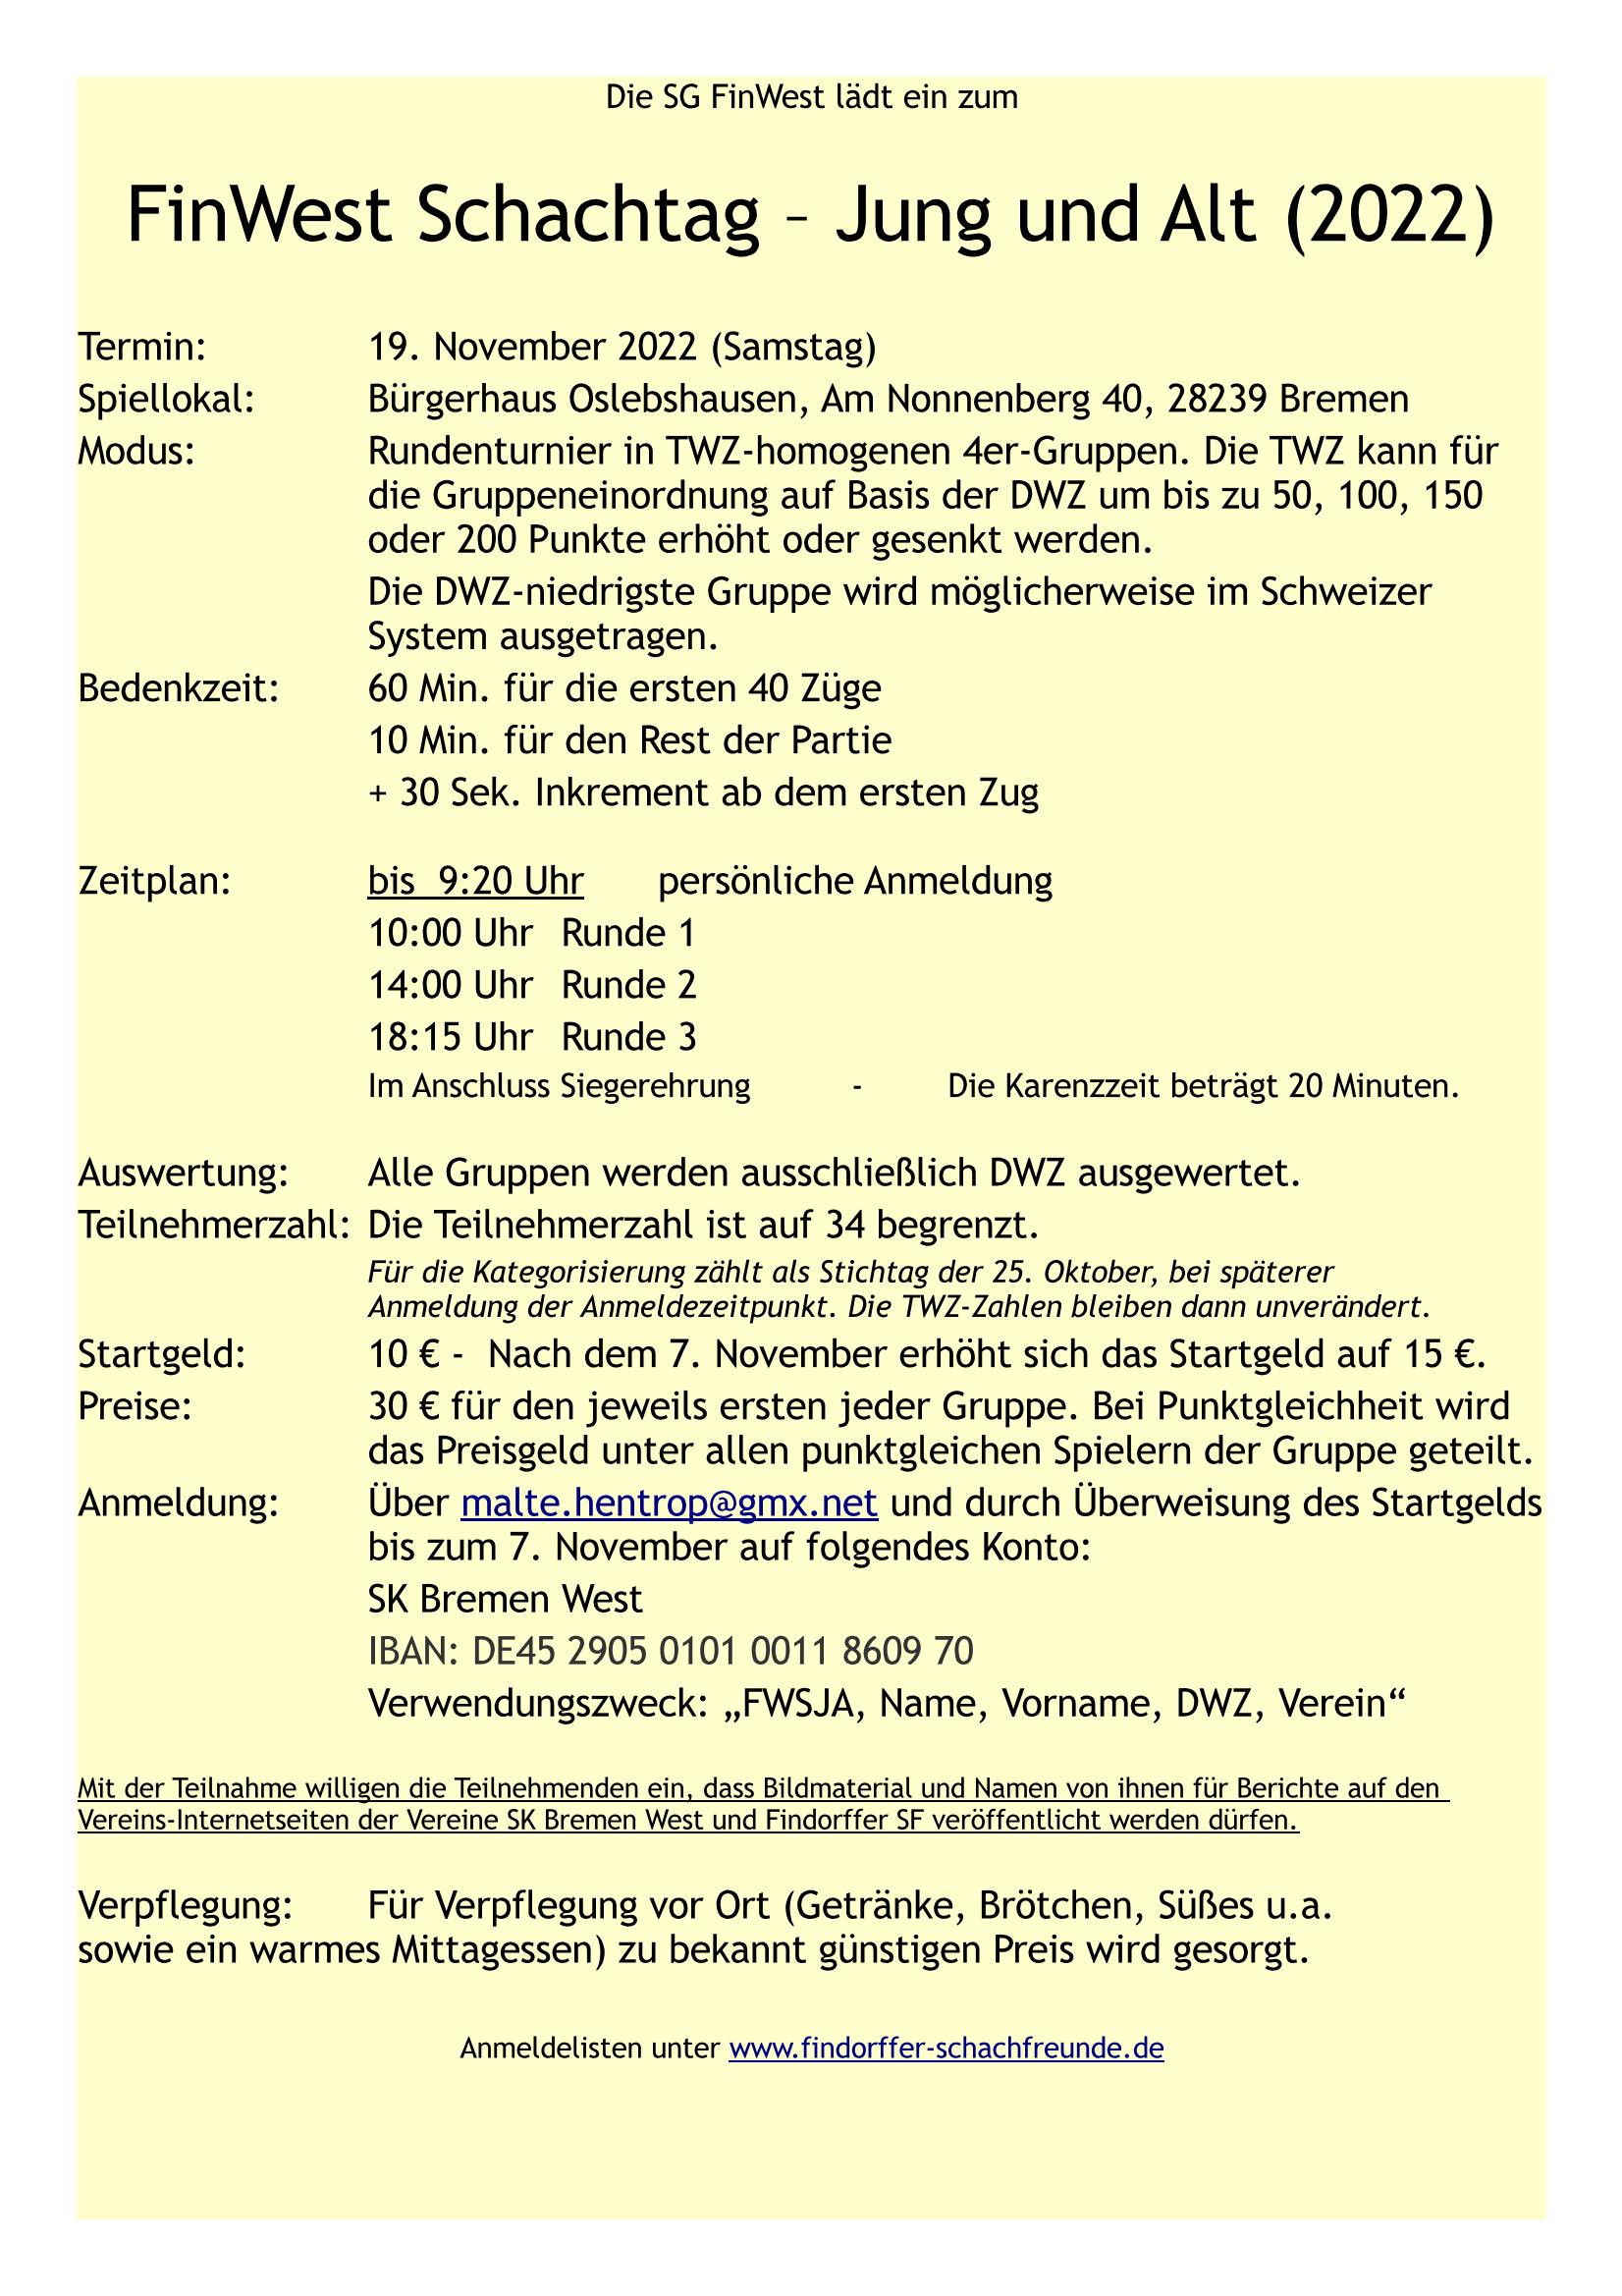 FinWest Schachtag 2022 JA Page 1